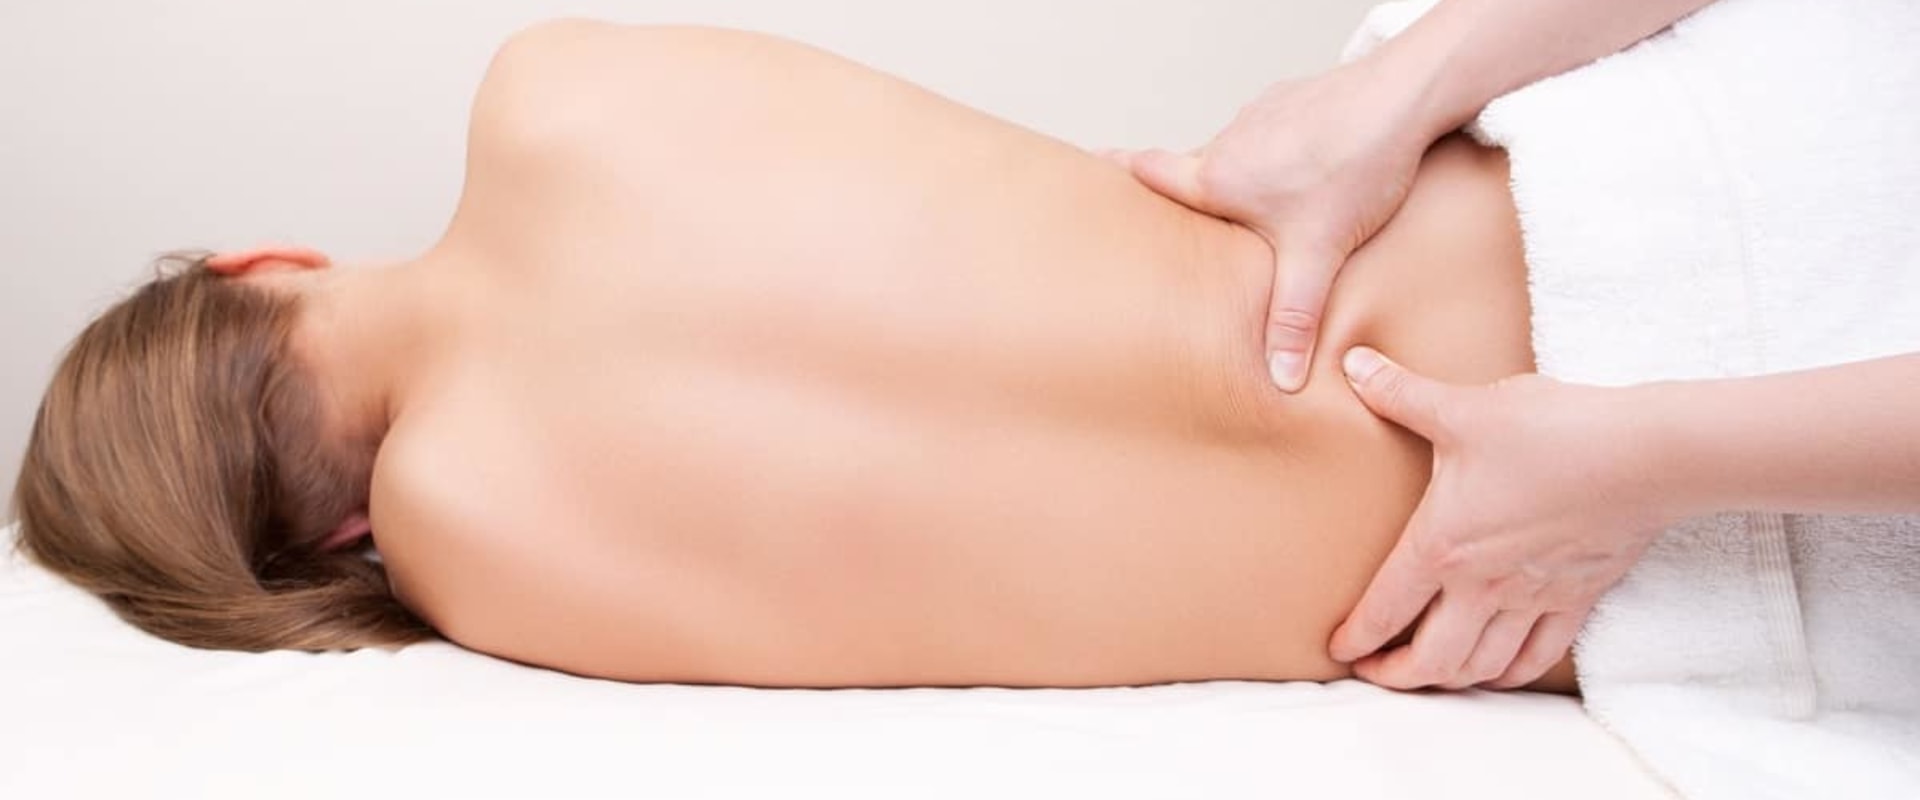 What type of massage is best for lower back pain?